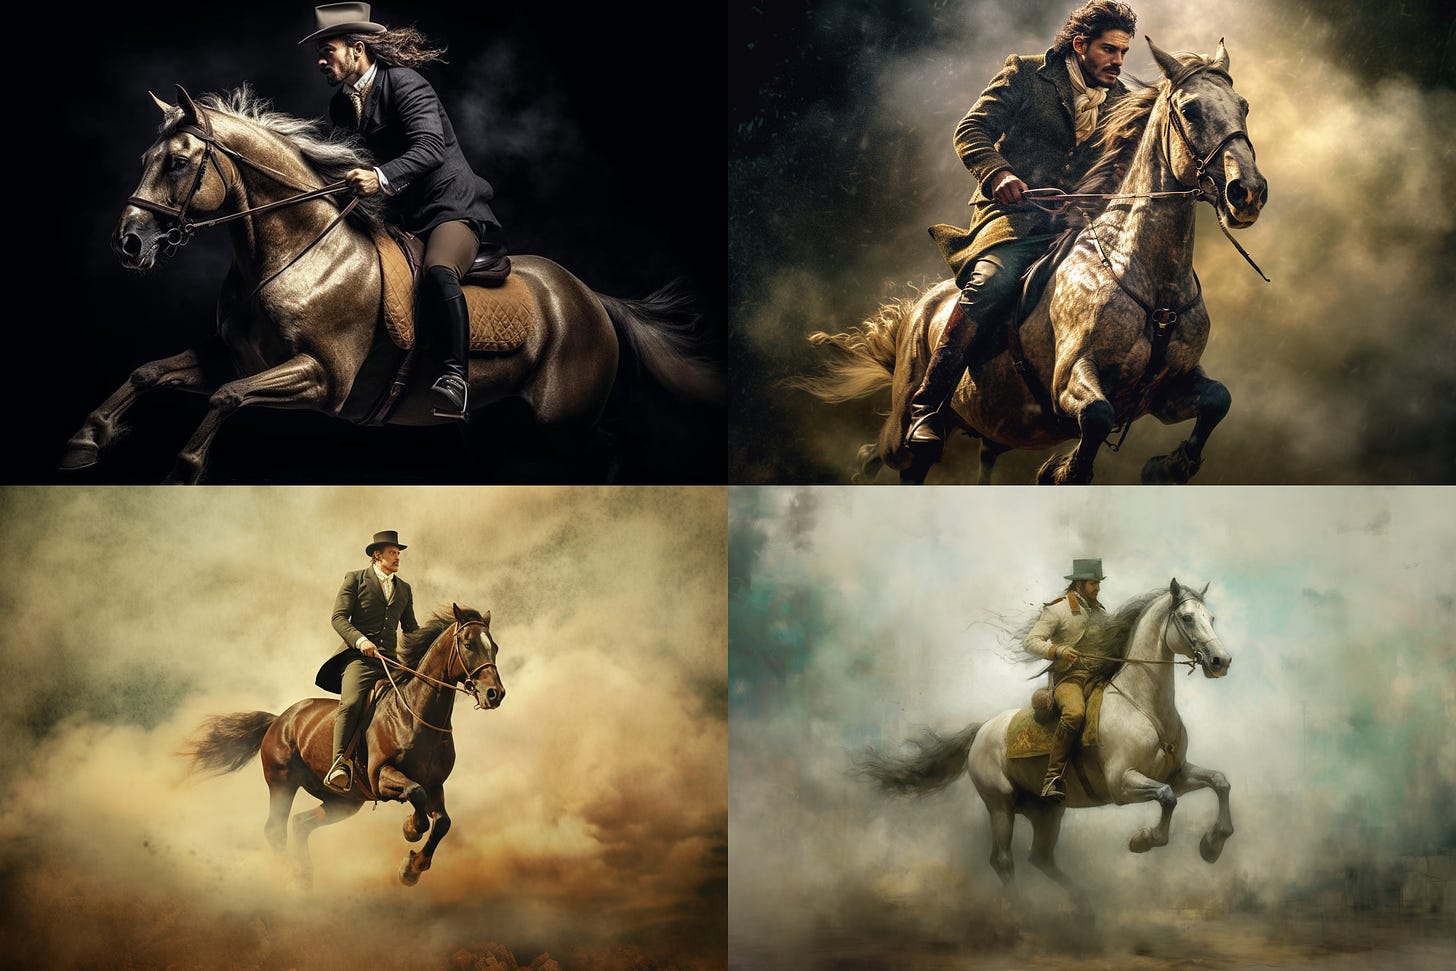 Midjourney V5.1 results for "man riding a horse" - 4-image grid